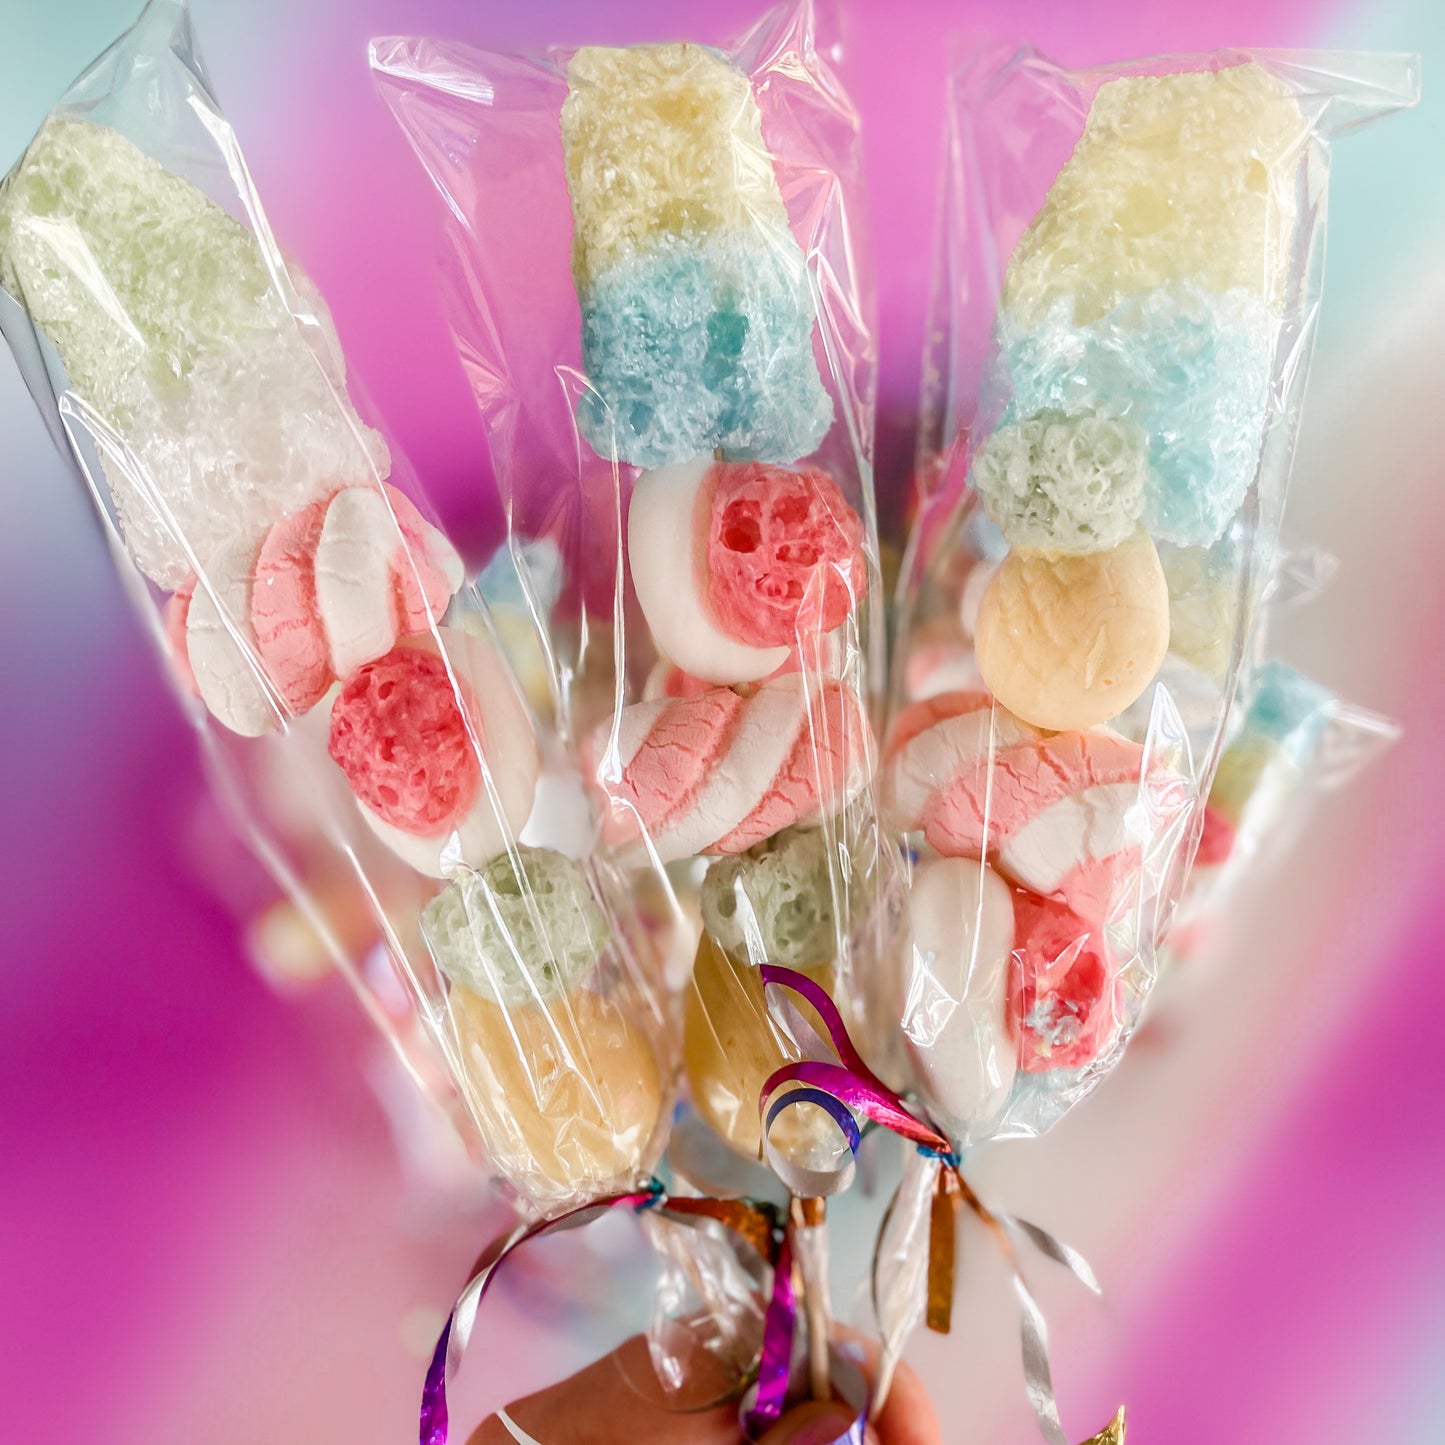 Freeze Dried Candy Kebabs